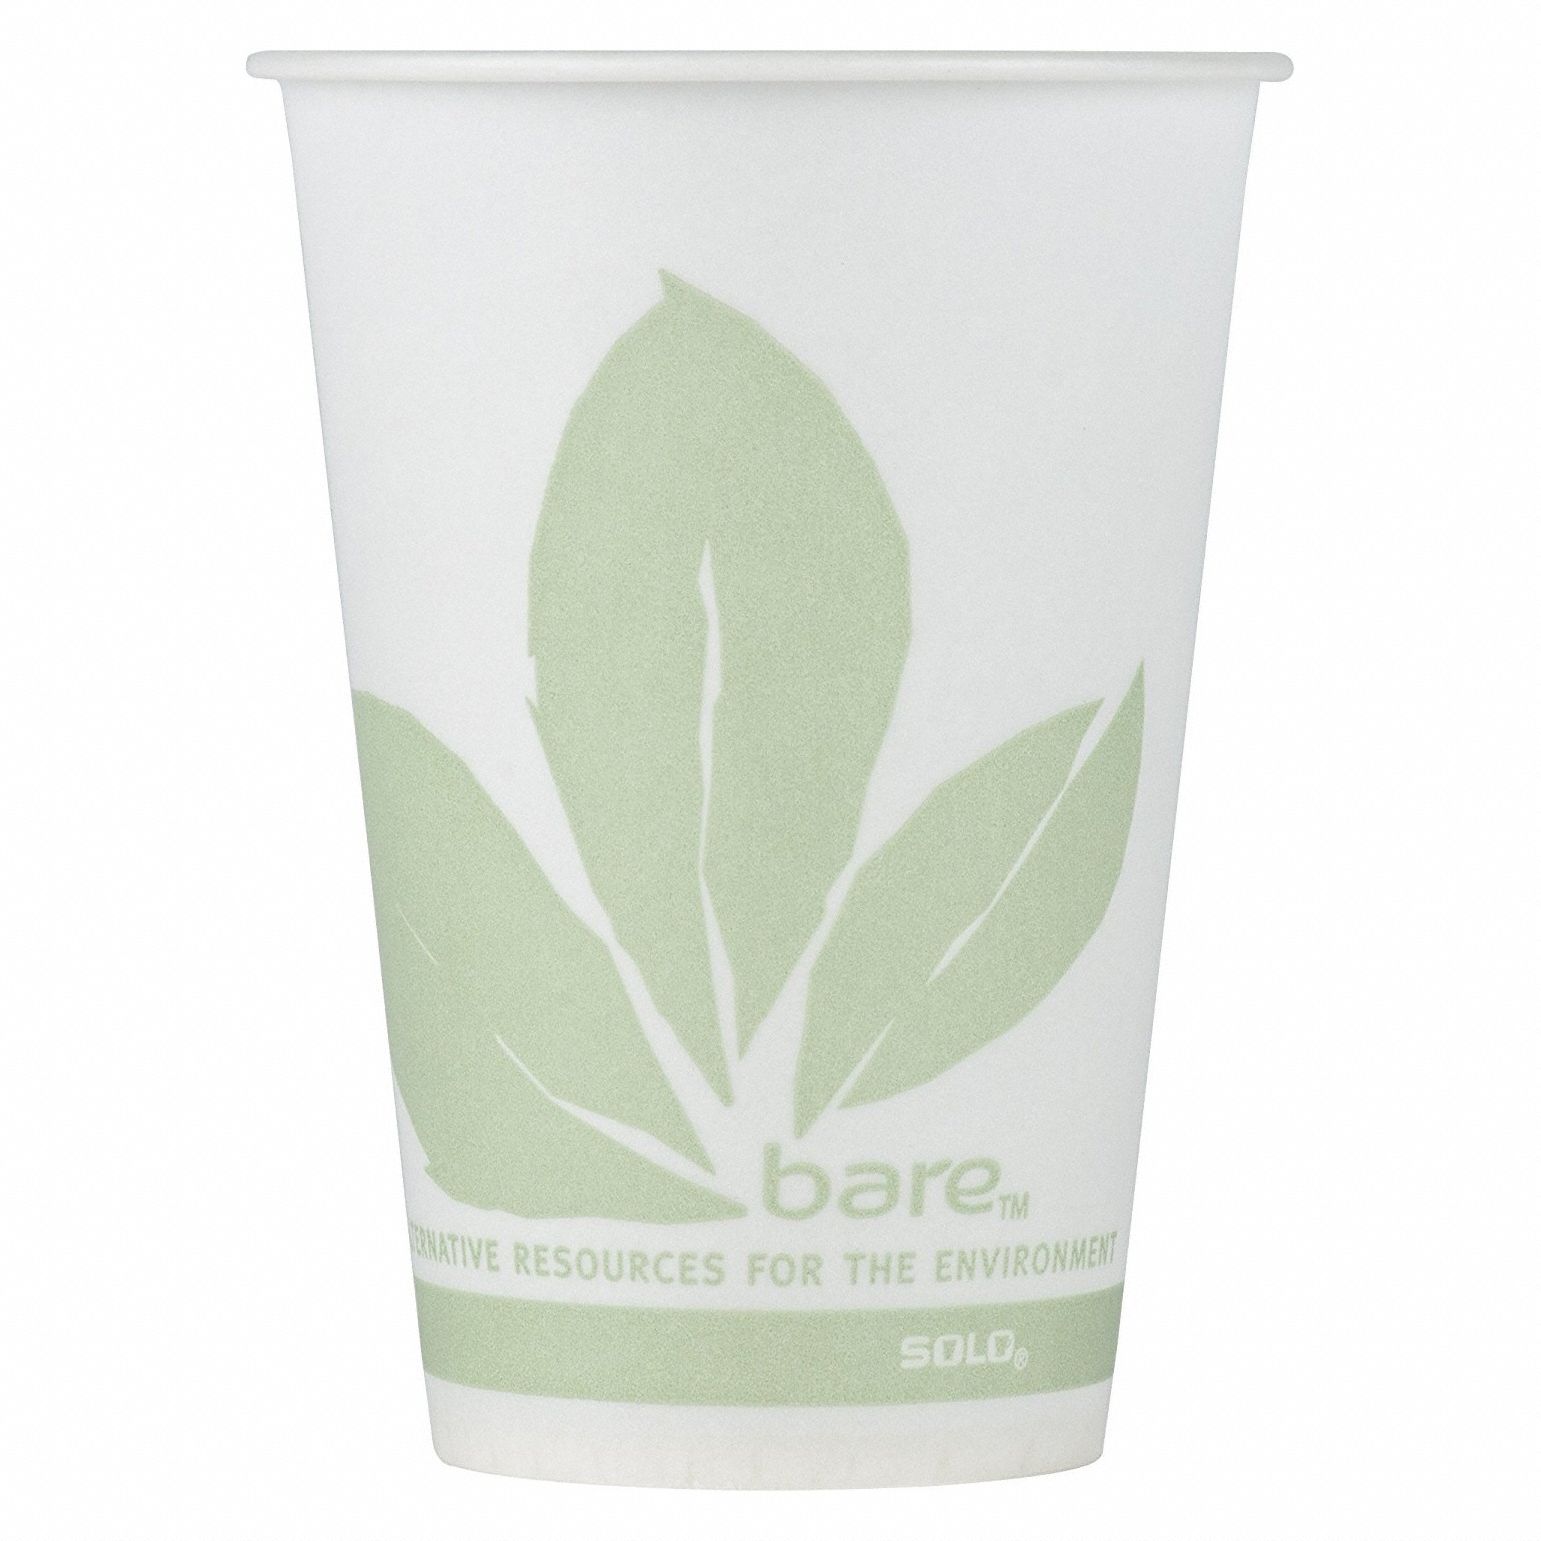 Disposable Cold Cup: 7 oz Capacity, Multi, Paper, Unwrapped, Bare, 2,000 PK